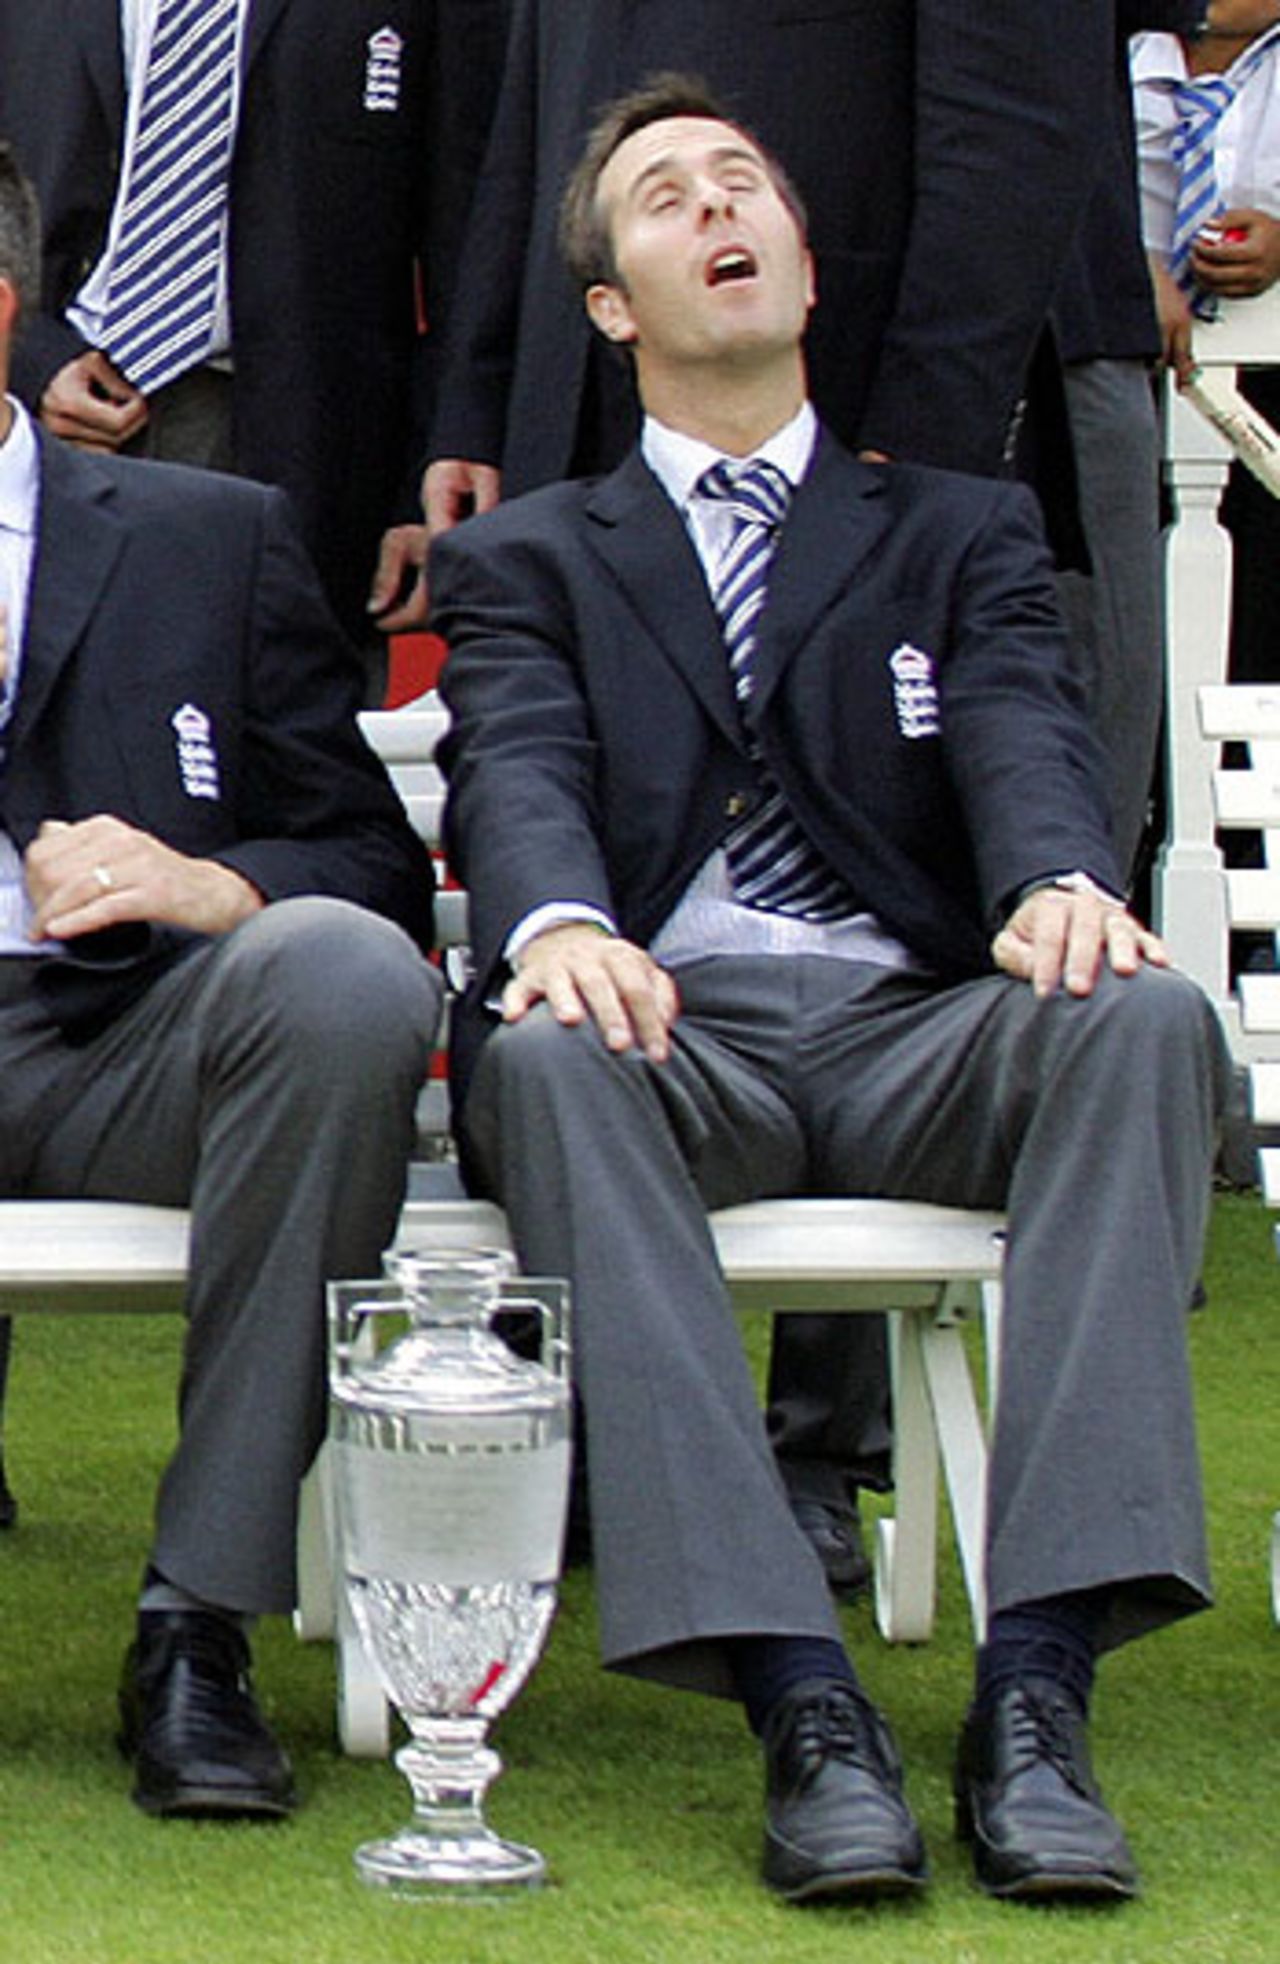 Michael Vaughan snatches forty winks at another photo opportunity, Lord's,  September 13, 2005